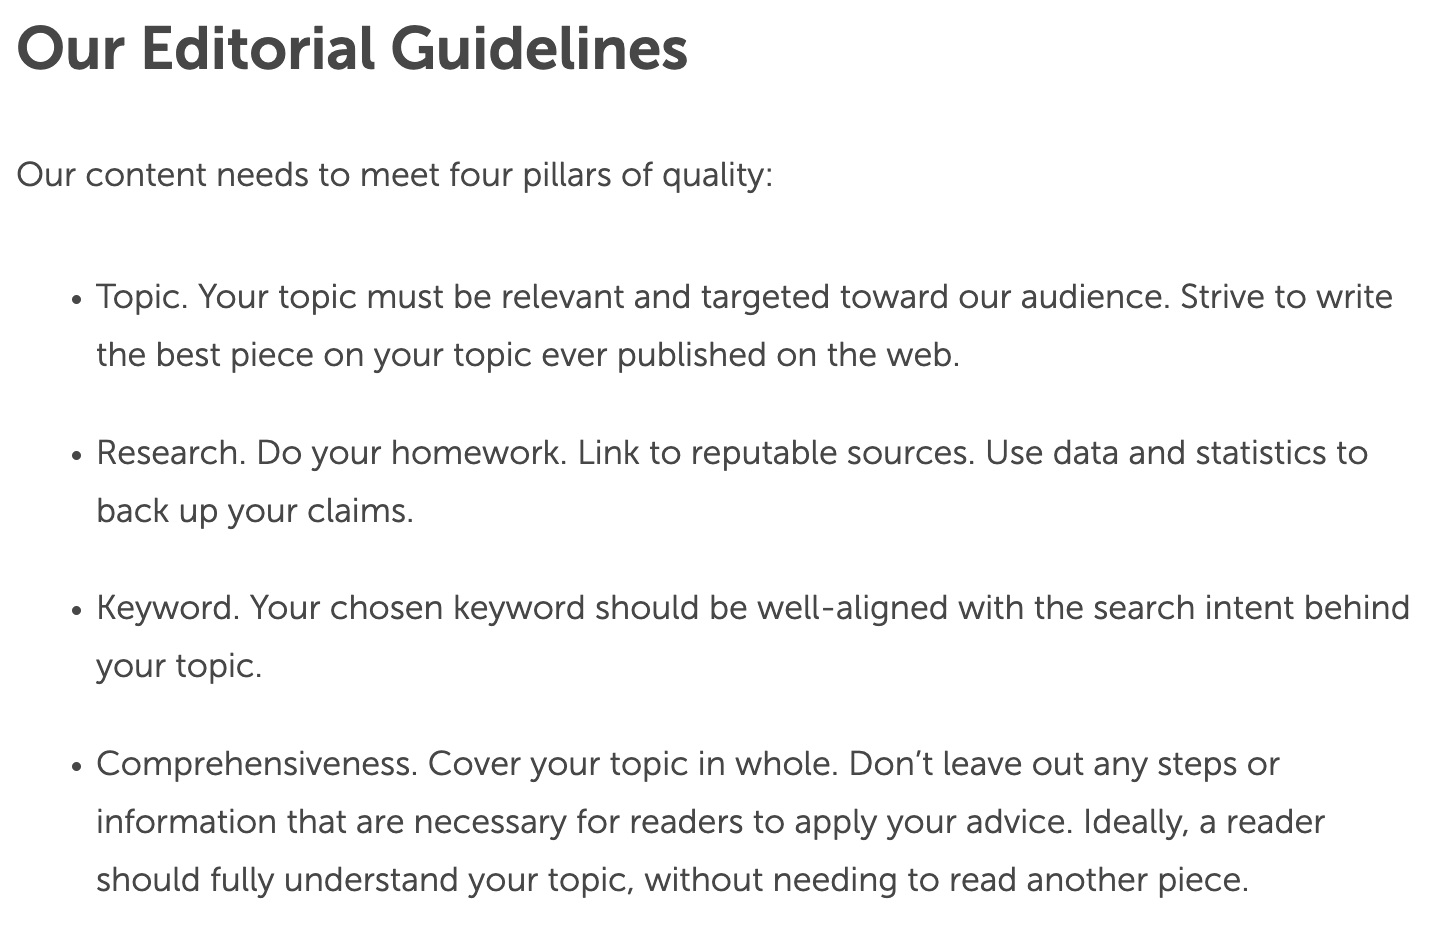 CoSchedule's editorial guidelines
